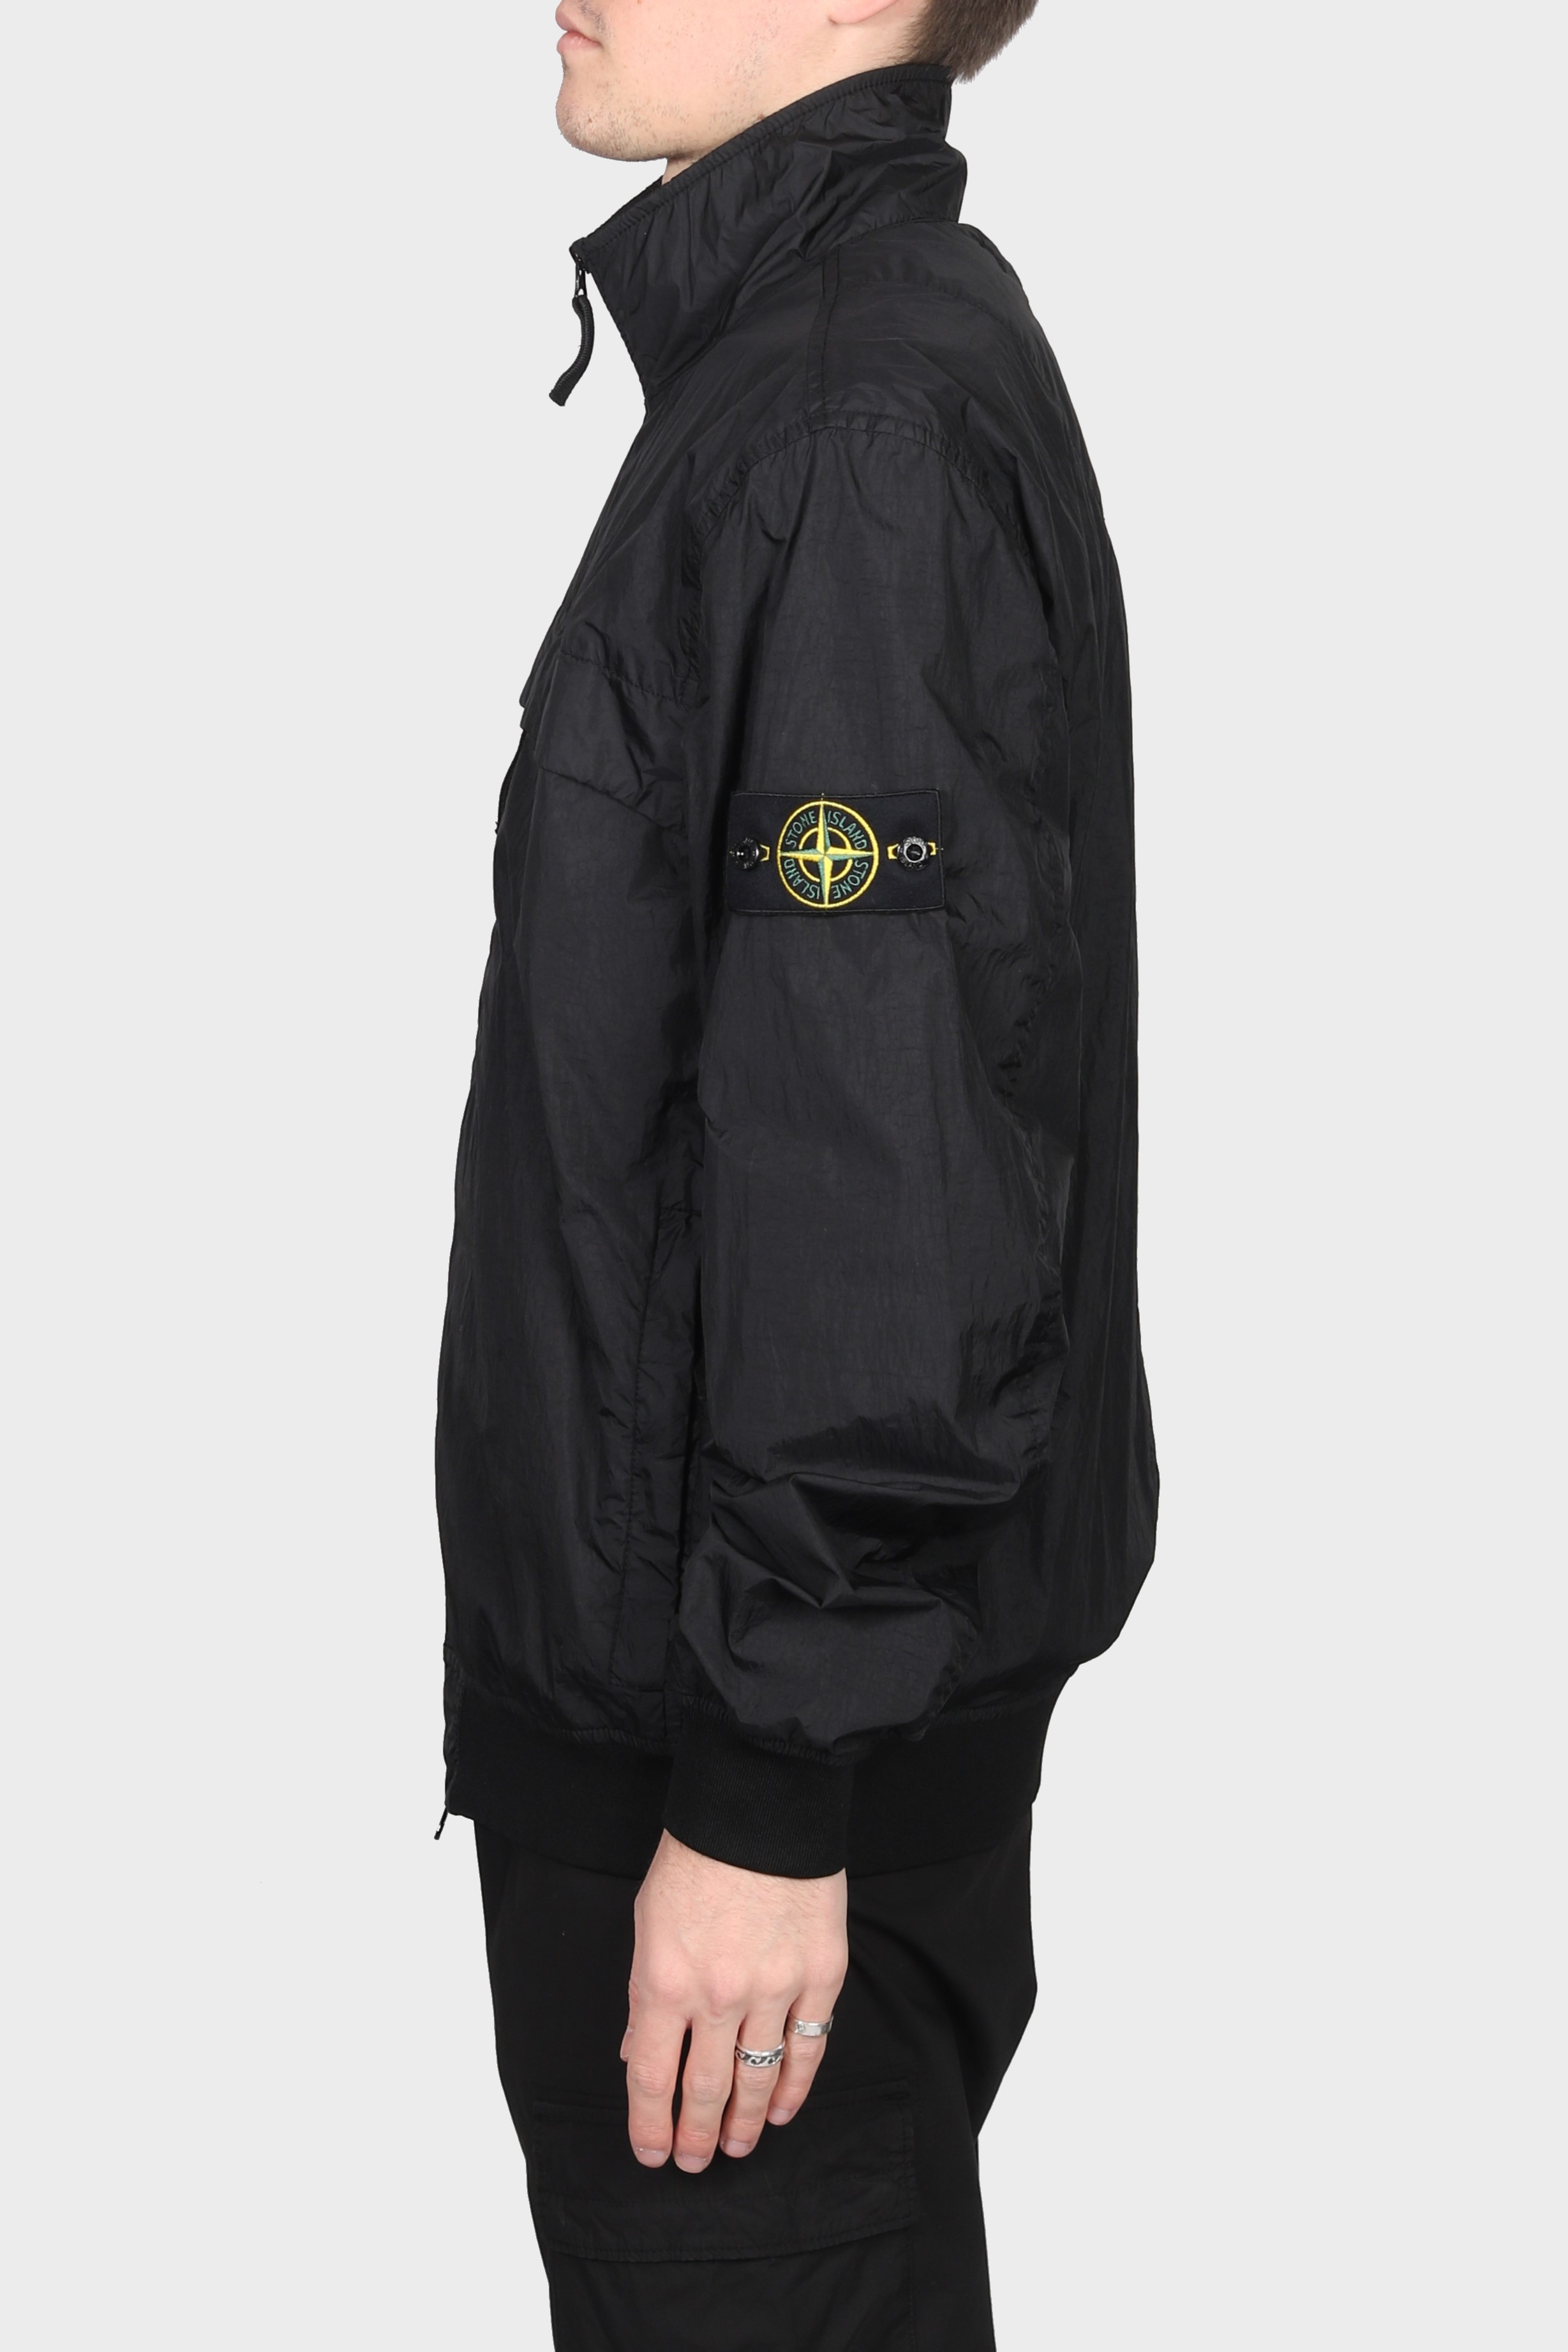 STONE ISLAND Garment Dyed Crinkle Reps Jacket in Black S